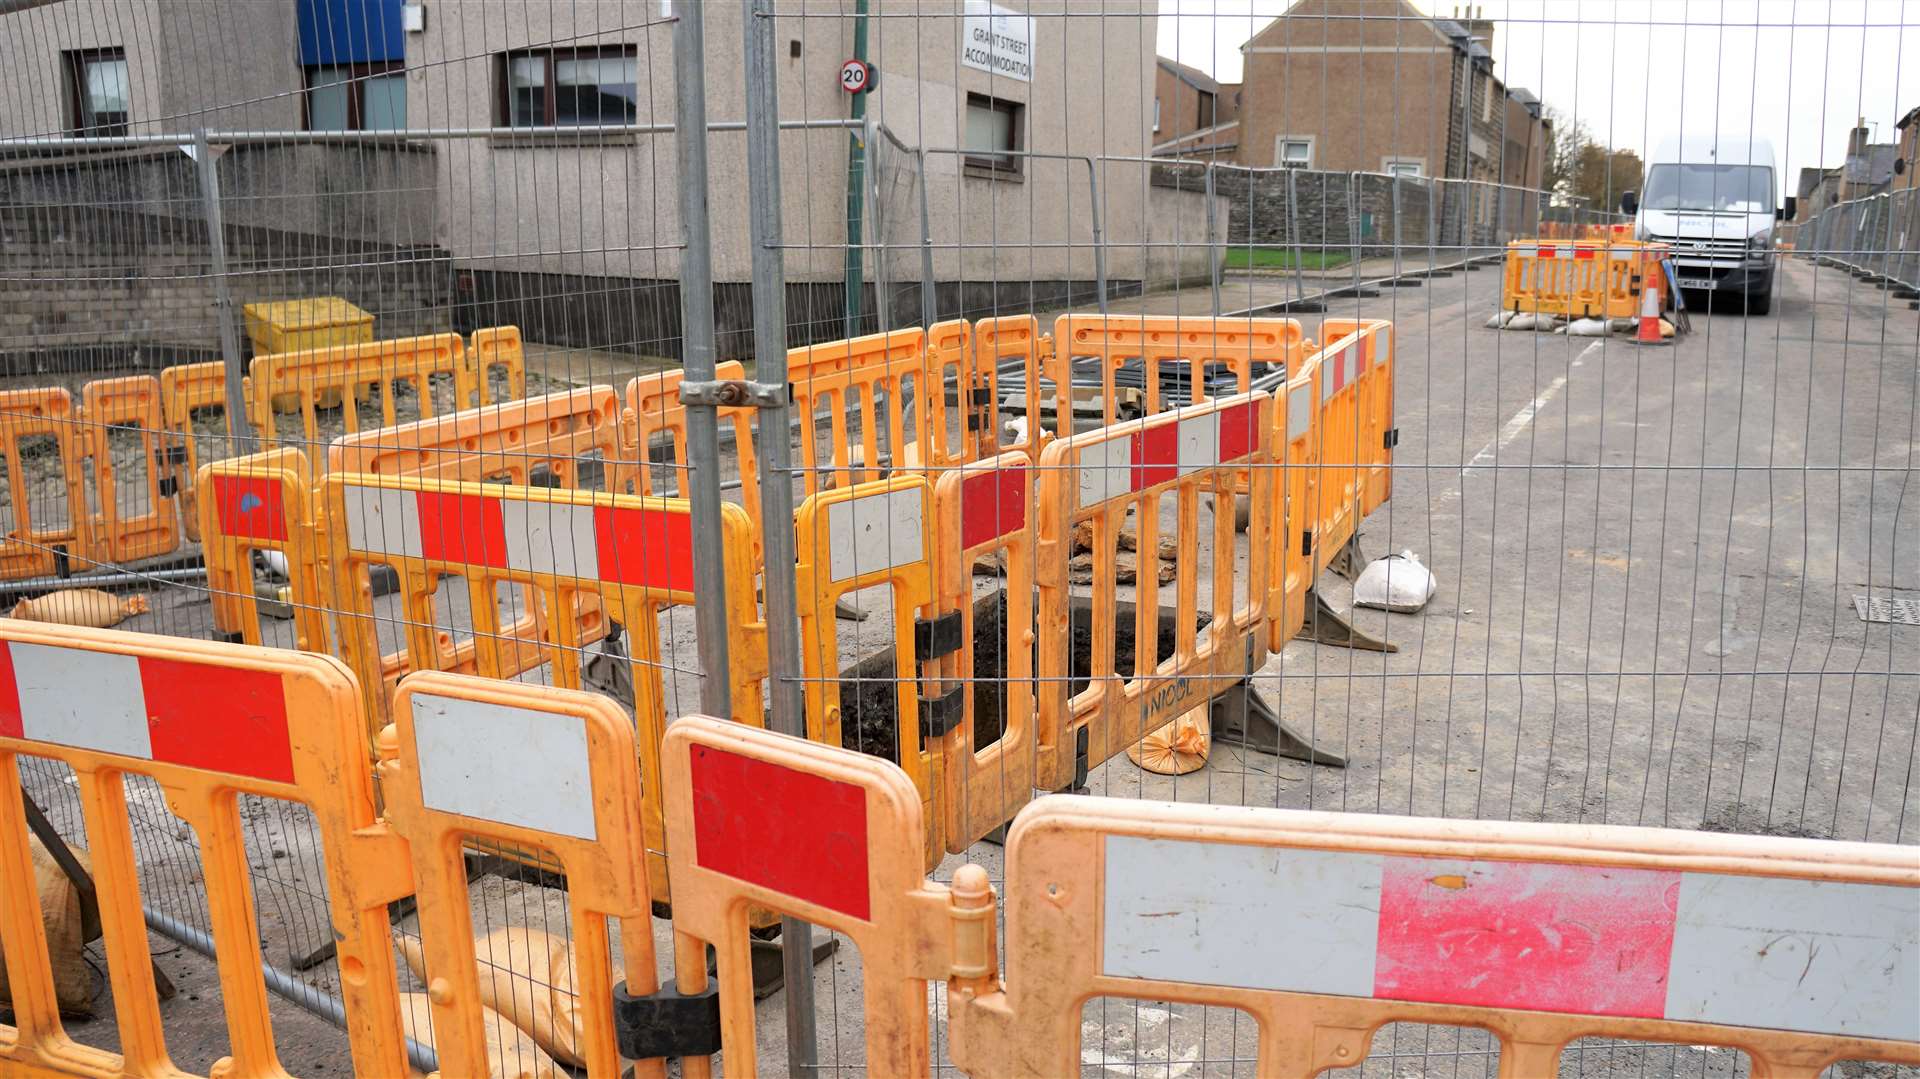 Junction at Macrae Street is blocked off due to the ongoing work. Picture: DGS